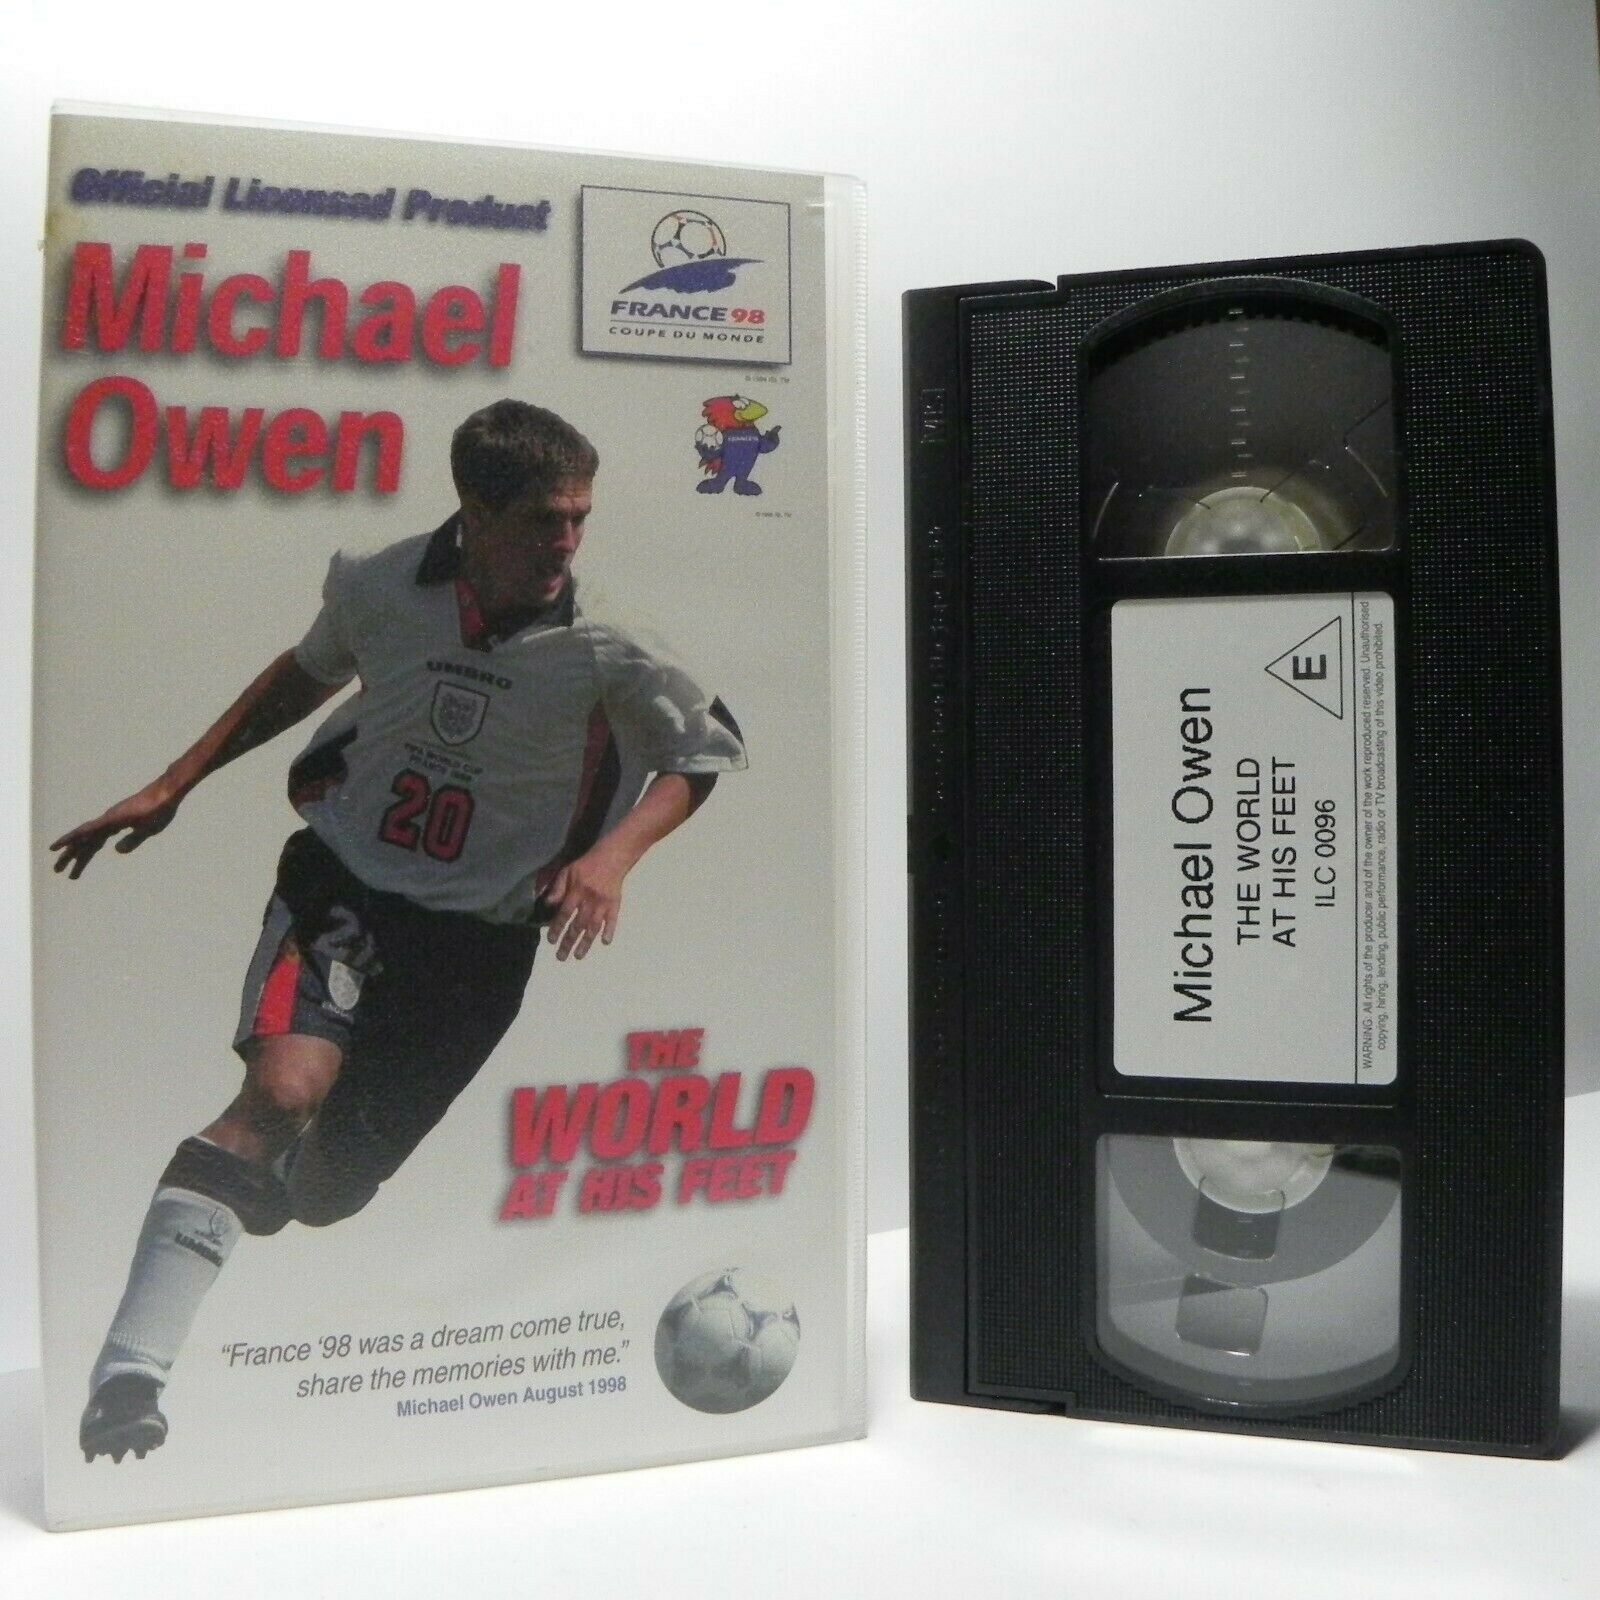 Michael Owen: The World At His Feet - World Cup - France'98